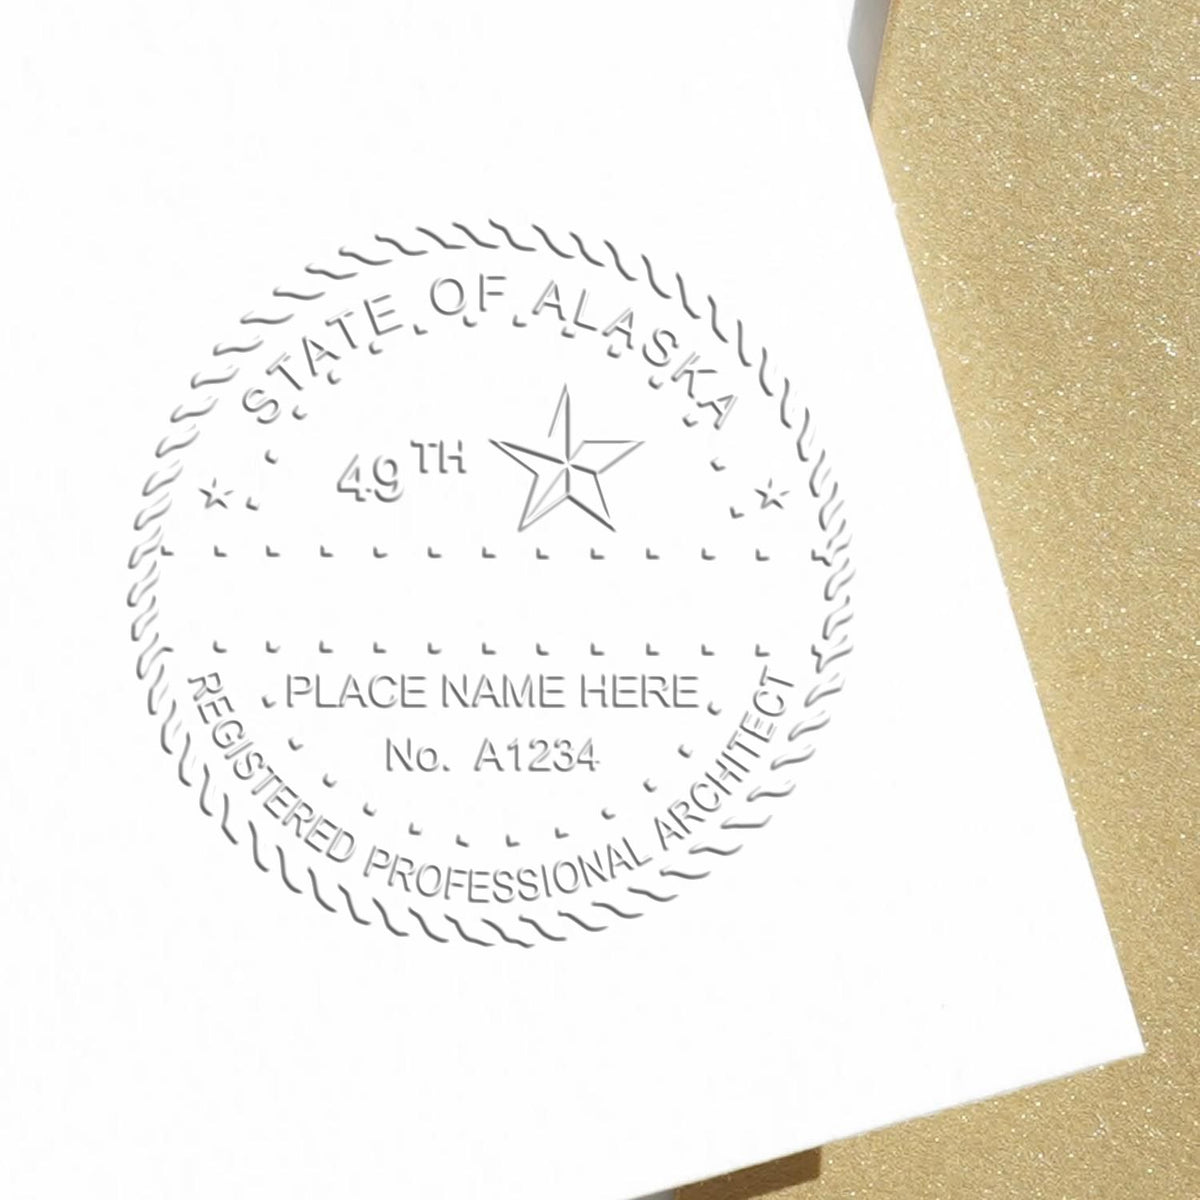 The Gift Alaska Architect Seal stamp impression comes to life with a crisp, detailed image stamped on paper - showcasing true professional quality.